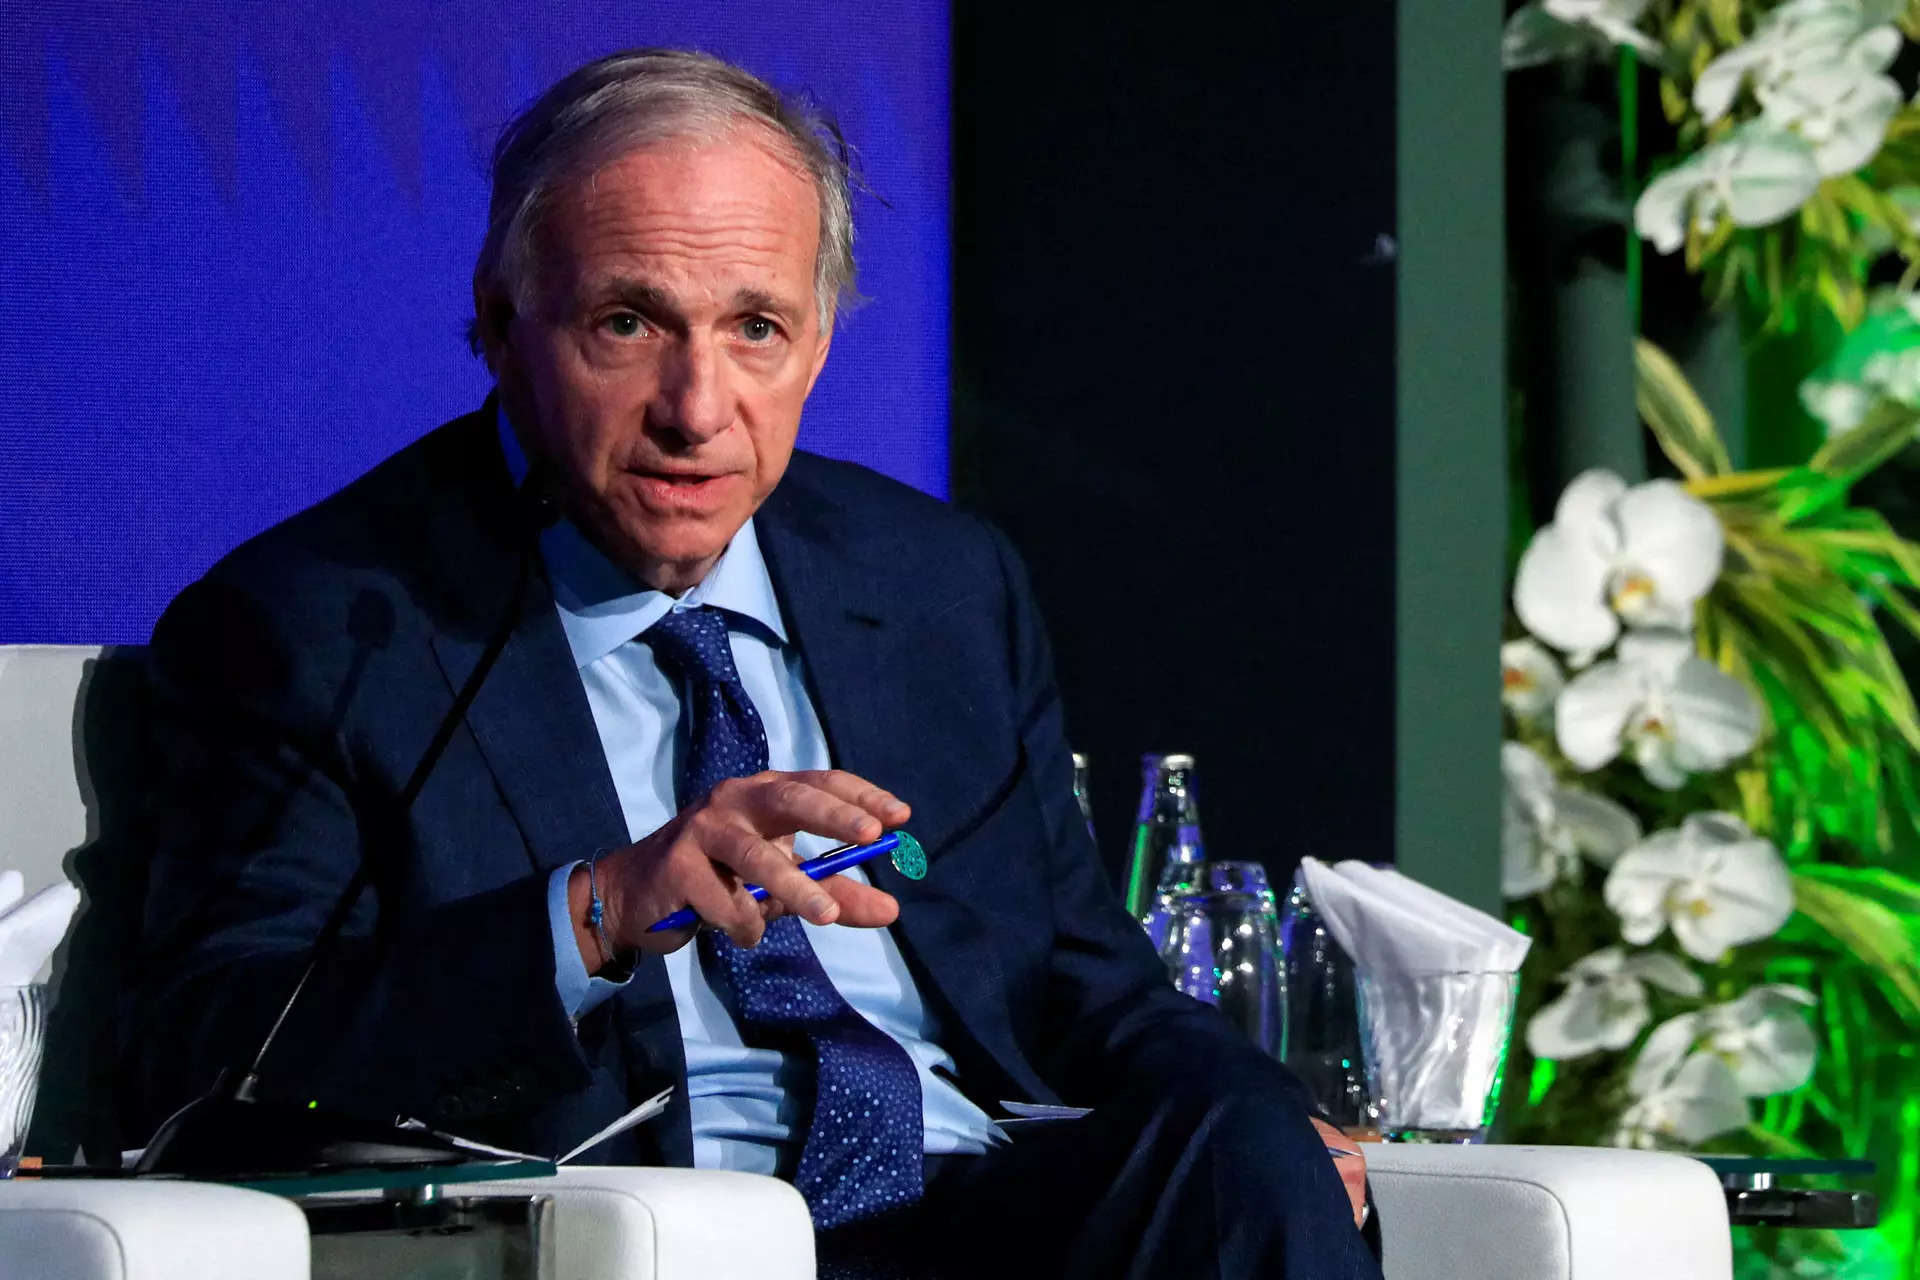 Ray Dalio: China must fix debt problems or face ‘lost decade’